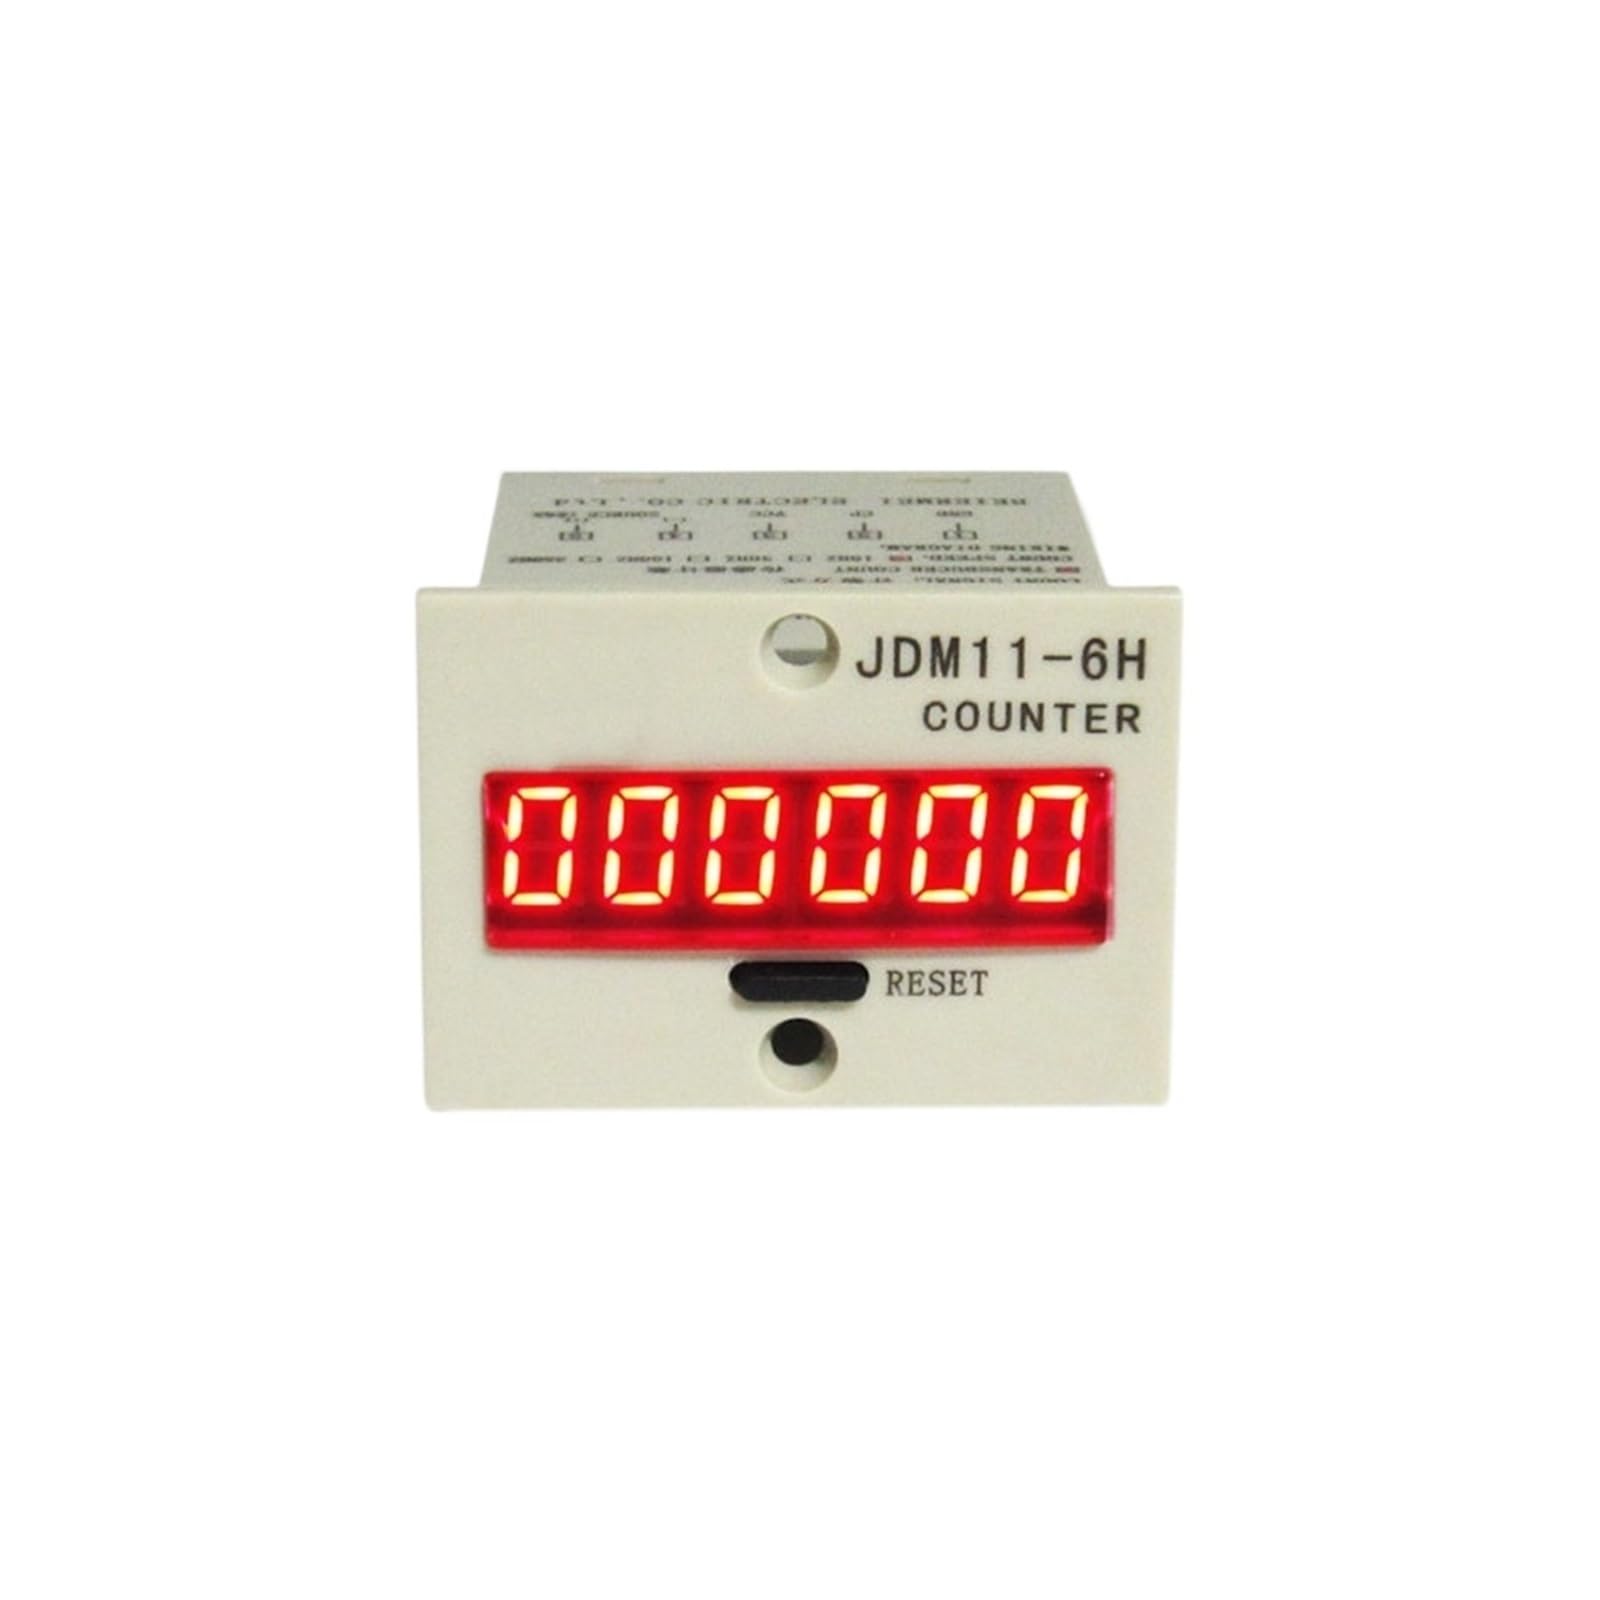 JDM11-6H Grey Digit Display Electronic Counter AC 220V DC 24V Production Counting LABDIP(Voltage count DC24V) von LABDIP